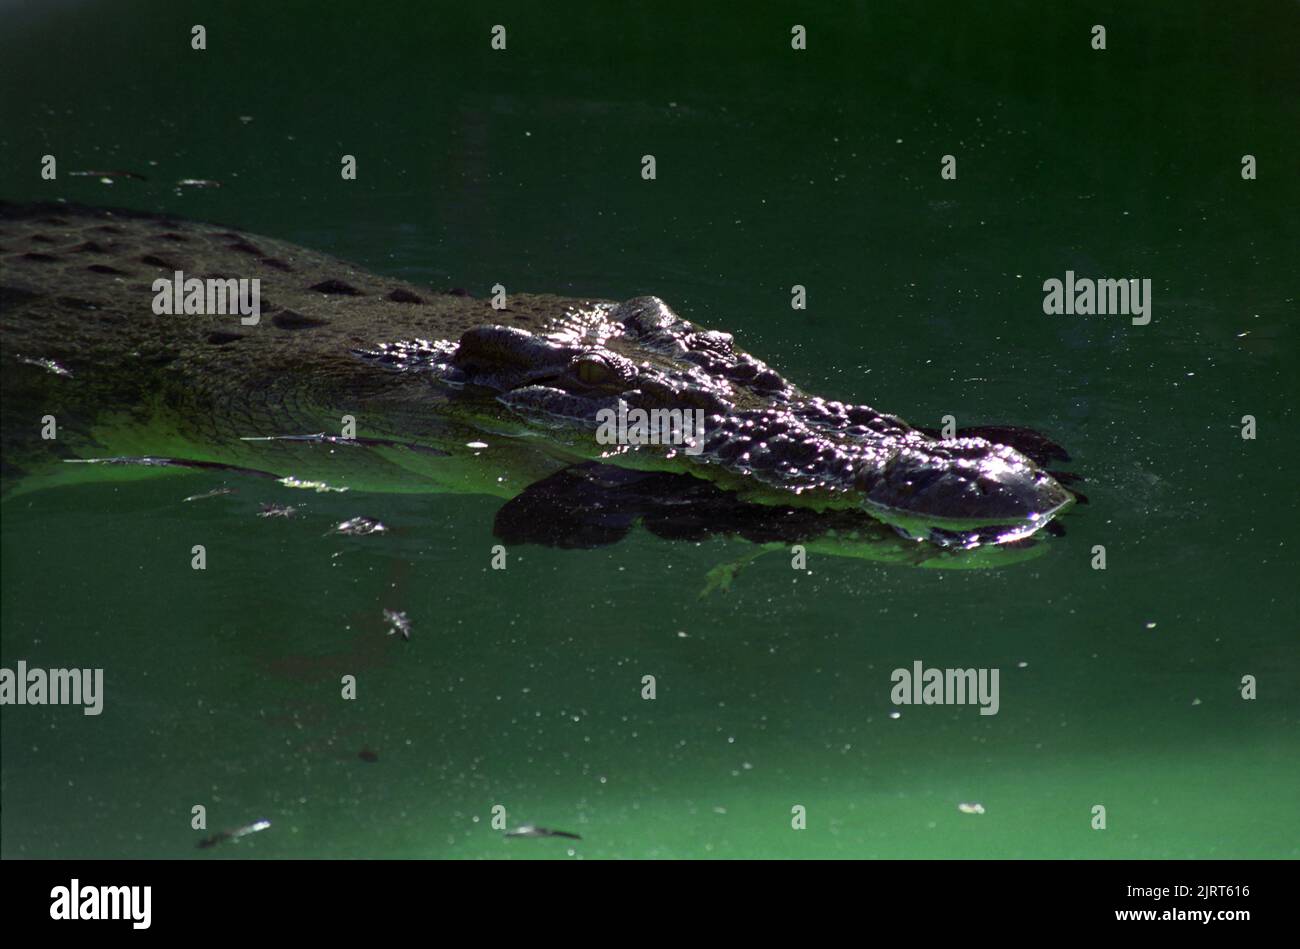 Close-up view of a salt water crocodile, or 'salty' (Crocodylus porosus) with prey in its jaws: Eric the three-legged crocodile in Gosford Reptile Park, now deceased. Stock Photo